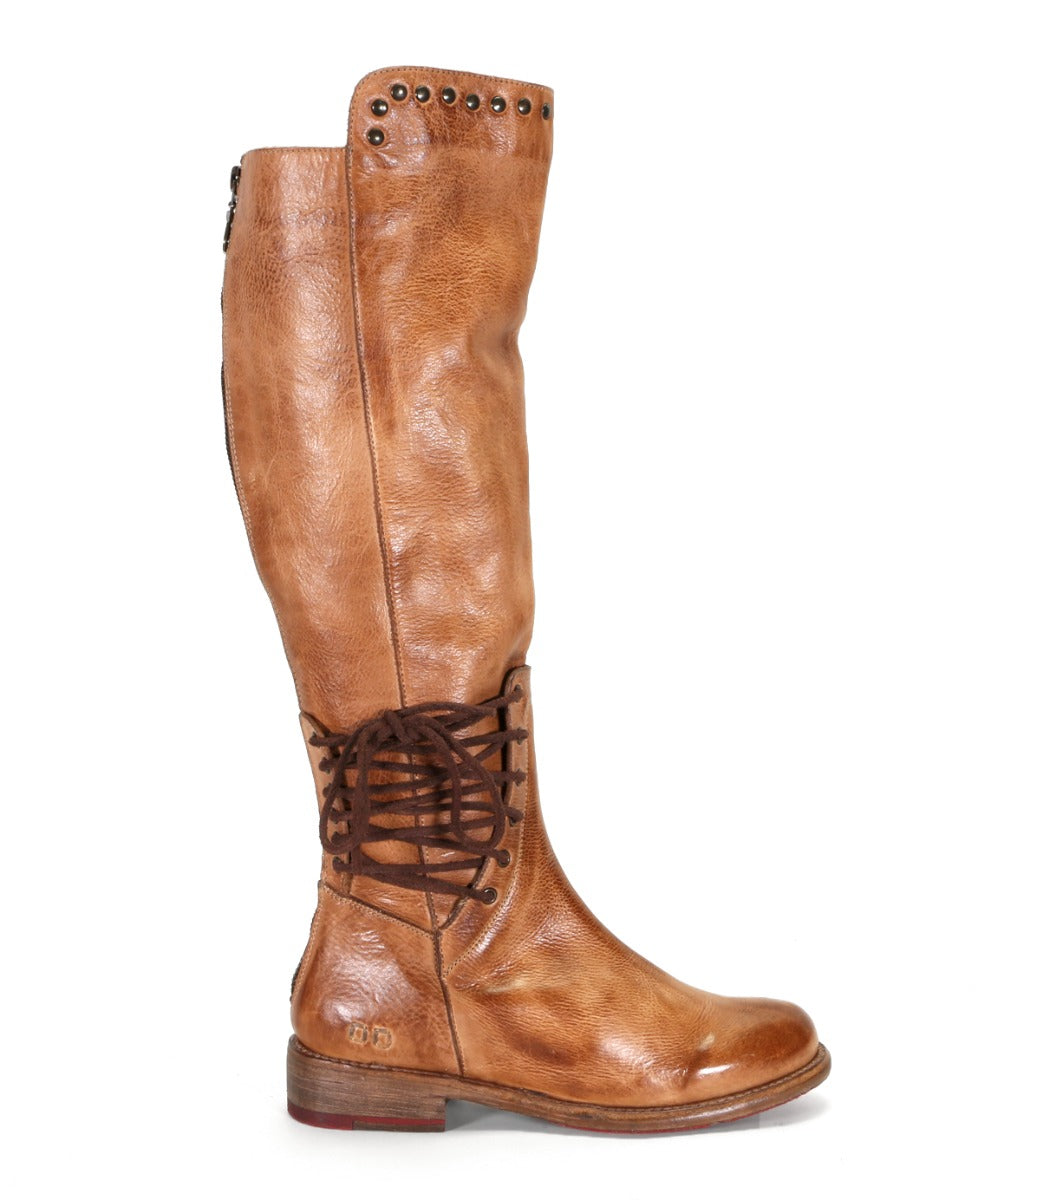 A women's Loxley boot with laces, made by Bed Stu.